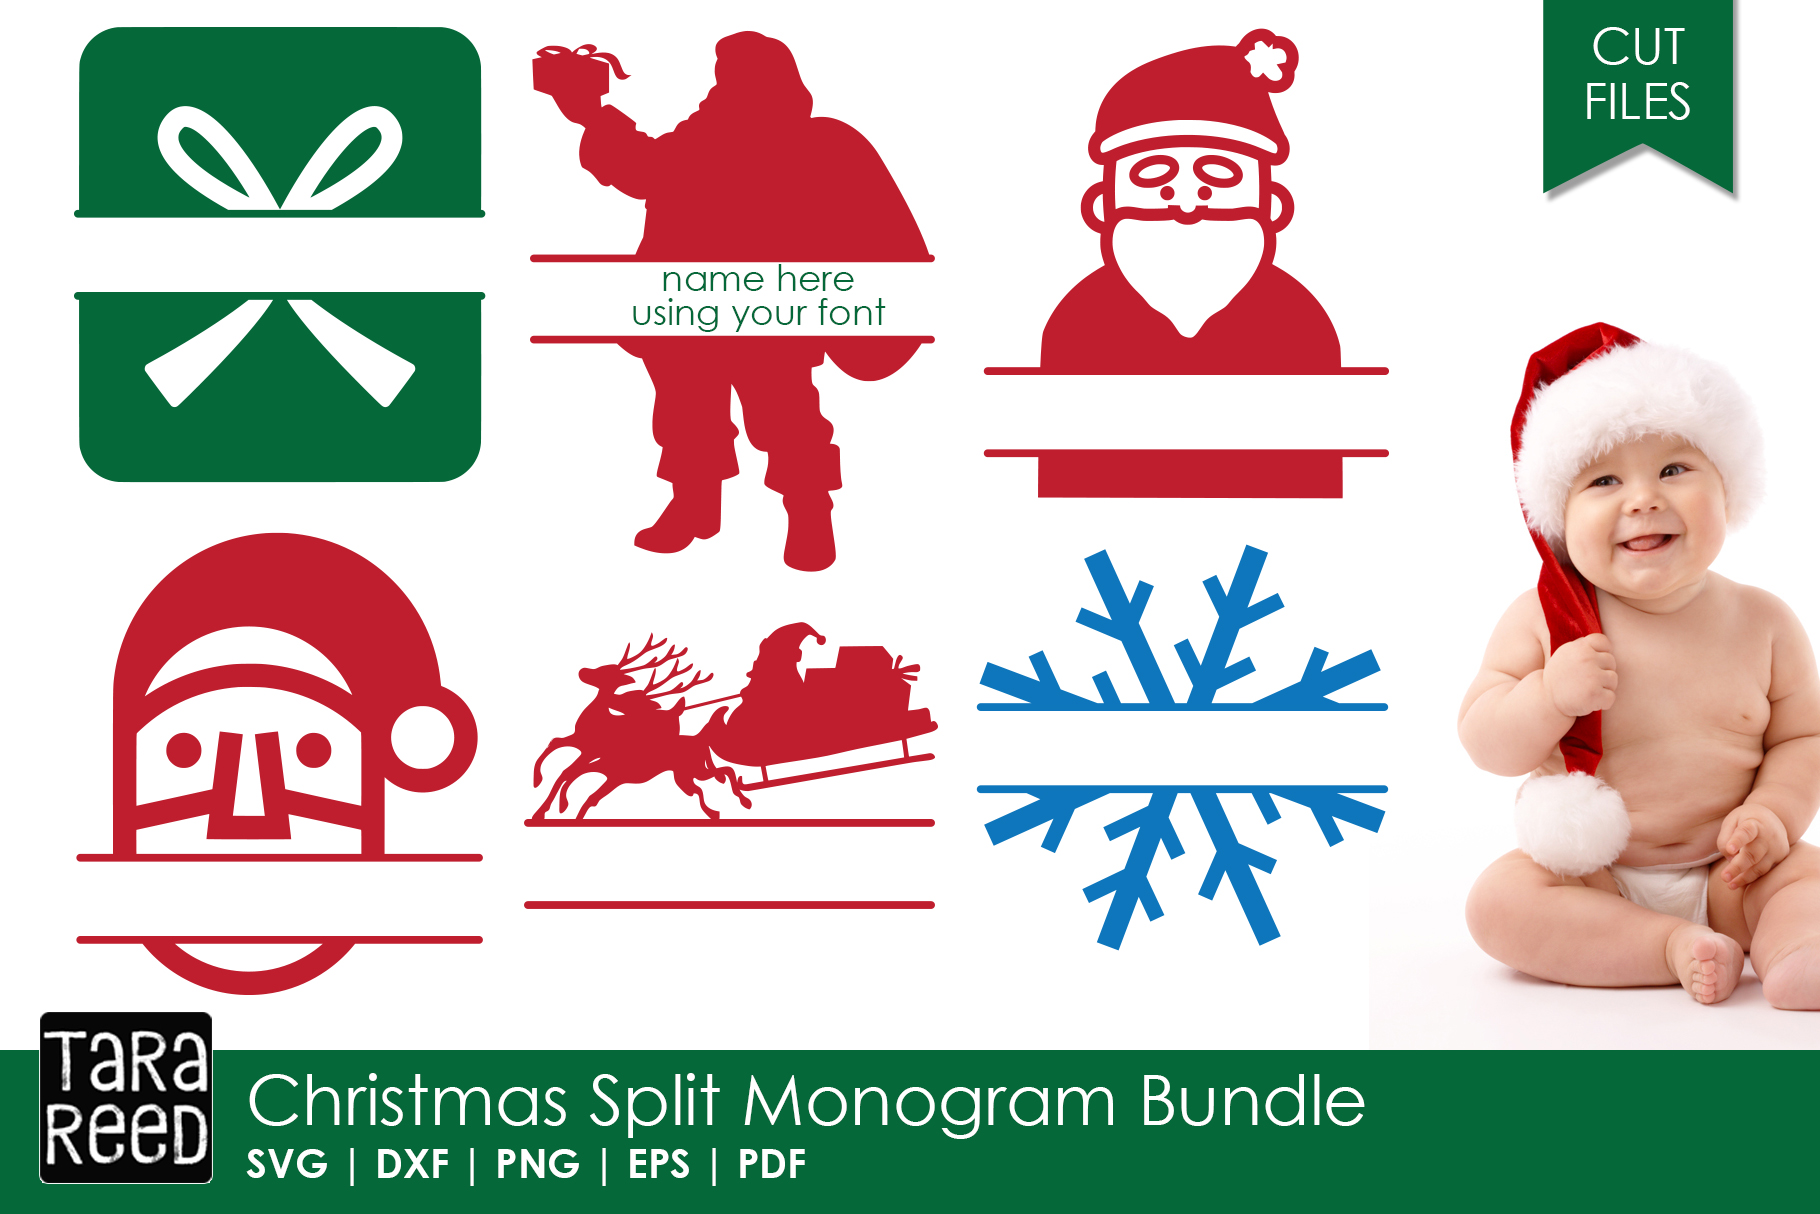 Download Christmas Split Monogram - Christmas SVG Files for Crafters